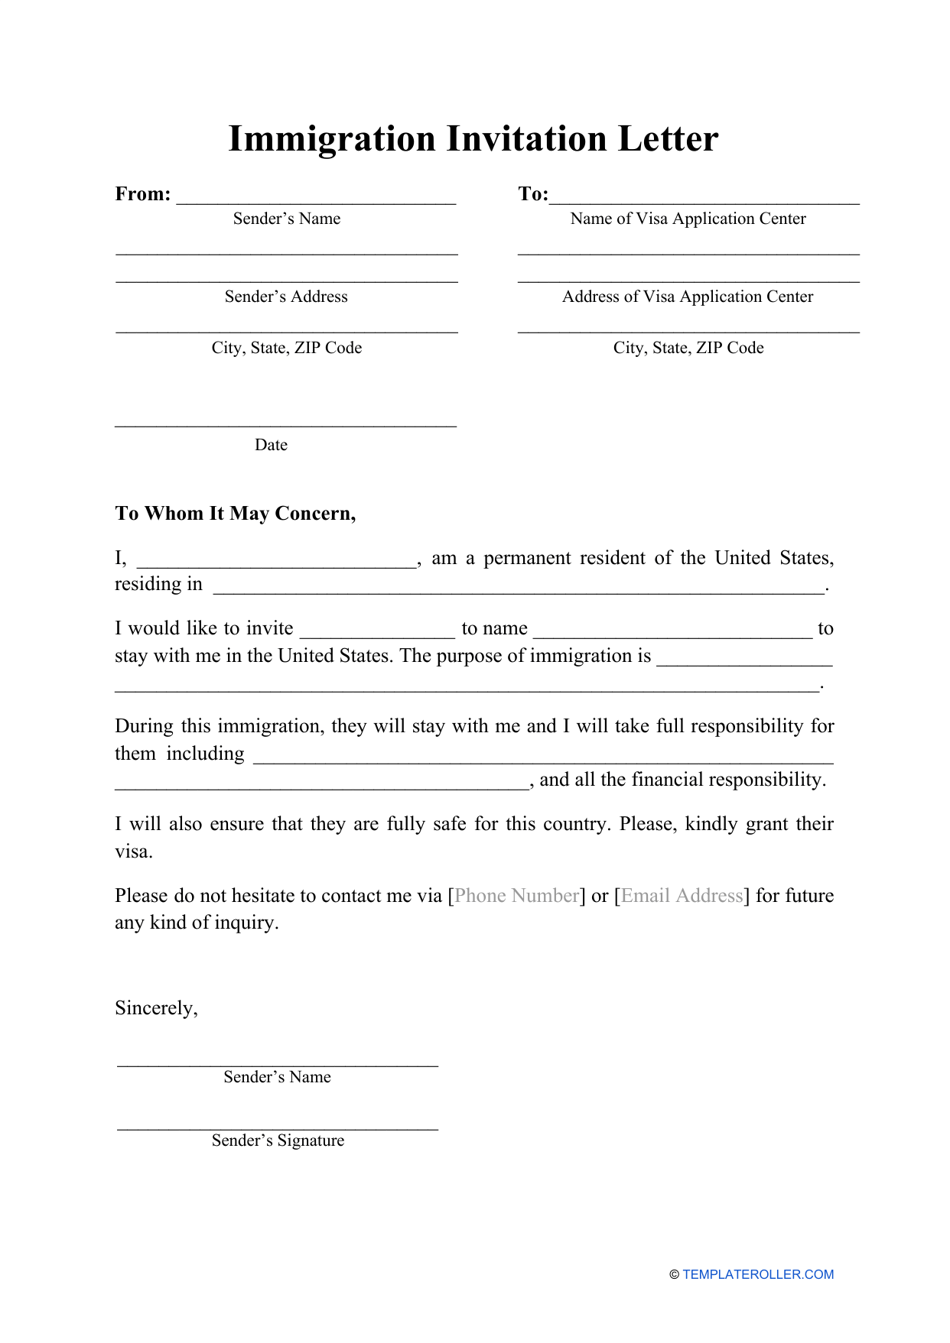 A immigration invitation letter template designed to facilitate the process of inviting someone to visit your country for immigration purposes.